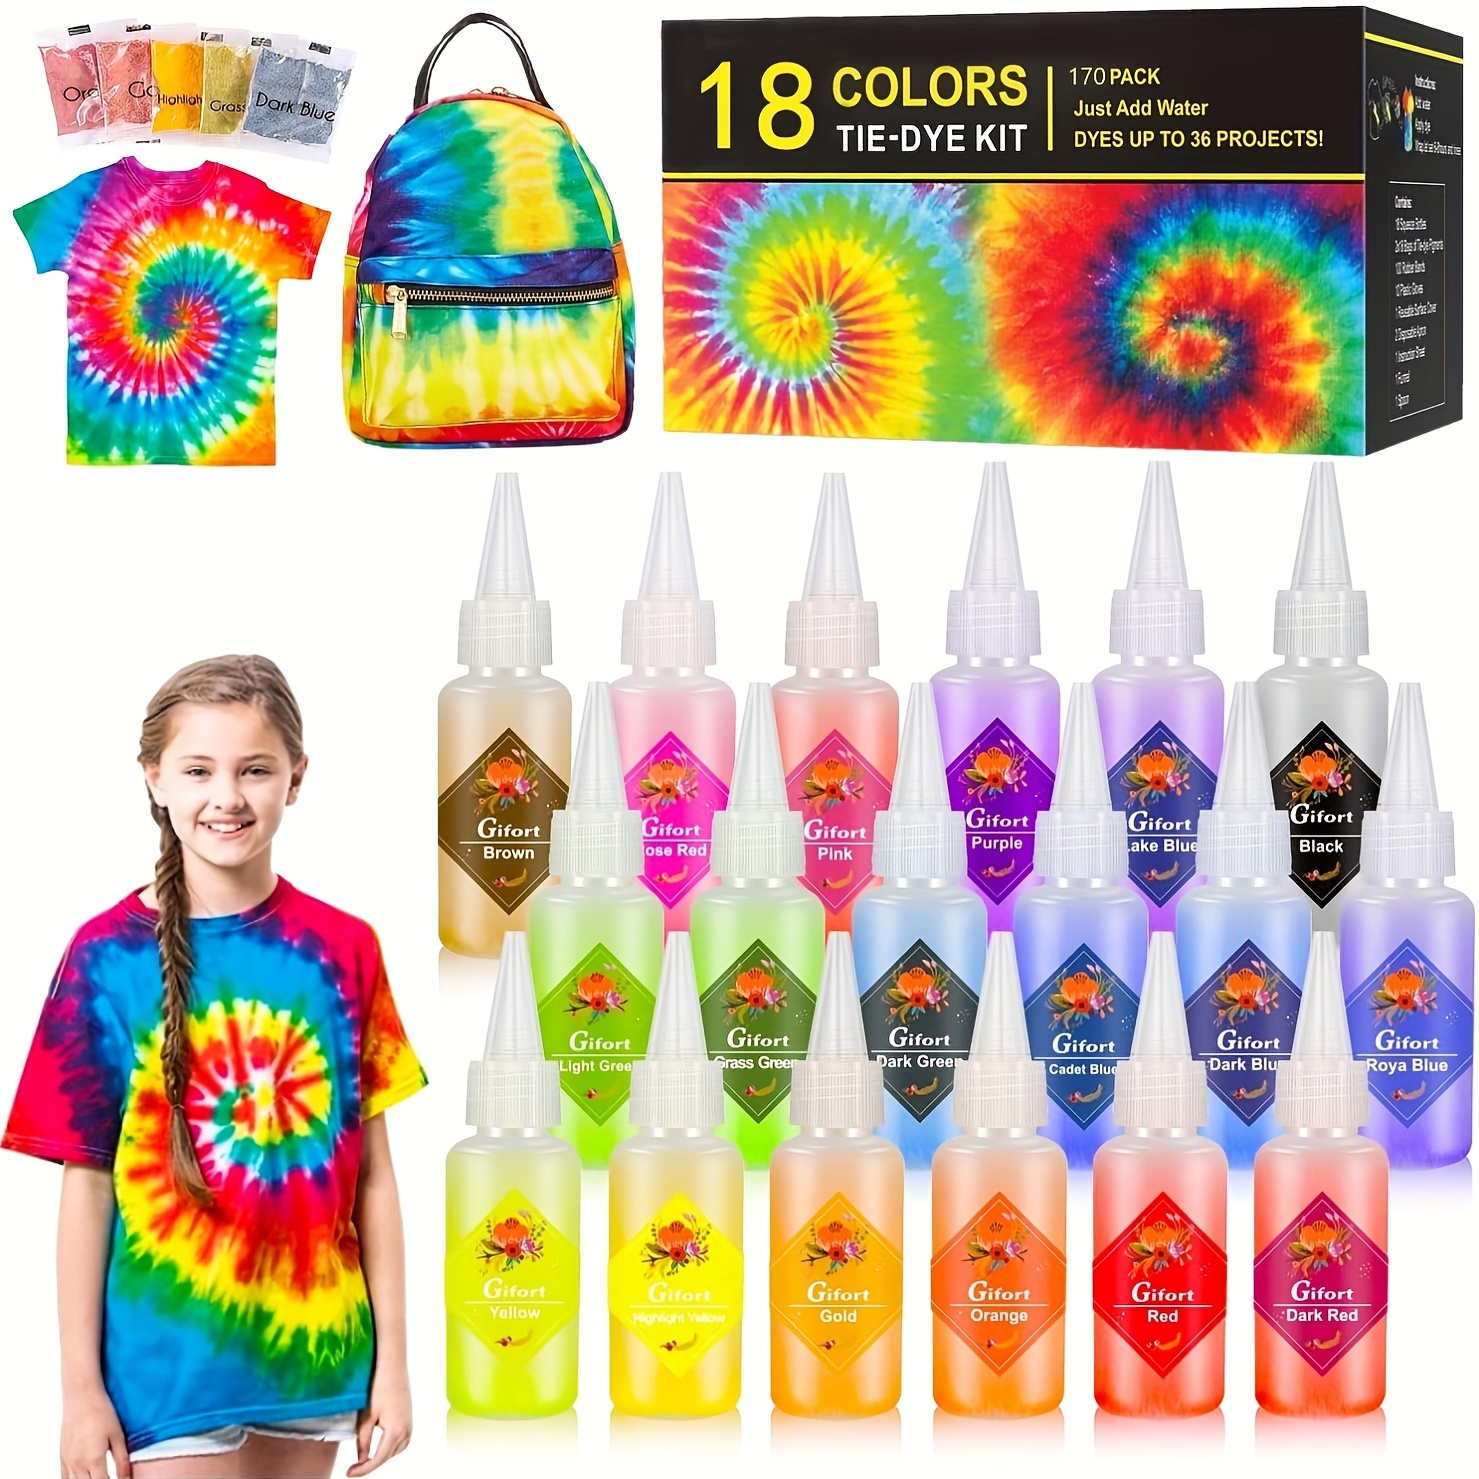 Tie Dye Kit Set of 26 Colors with Aprons, Gloves, Rubber Bands and Table Cover for DIY Fabric Crafts, Size: NA